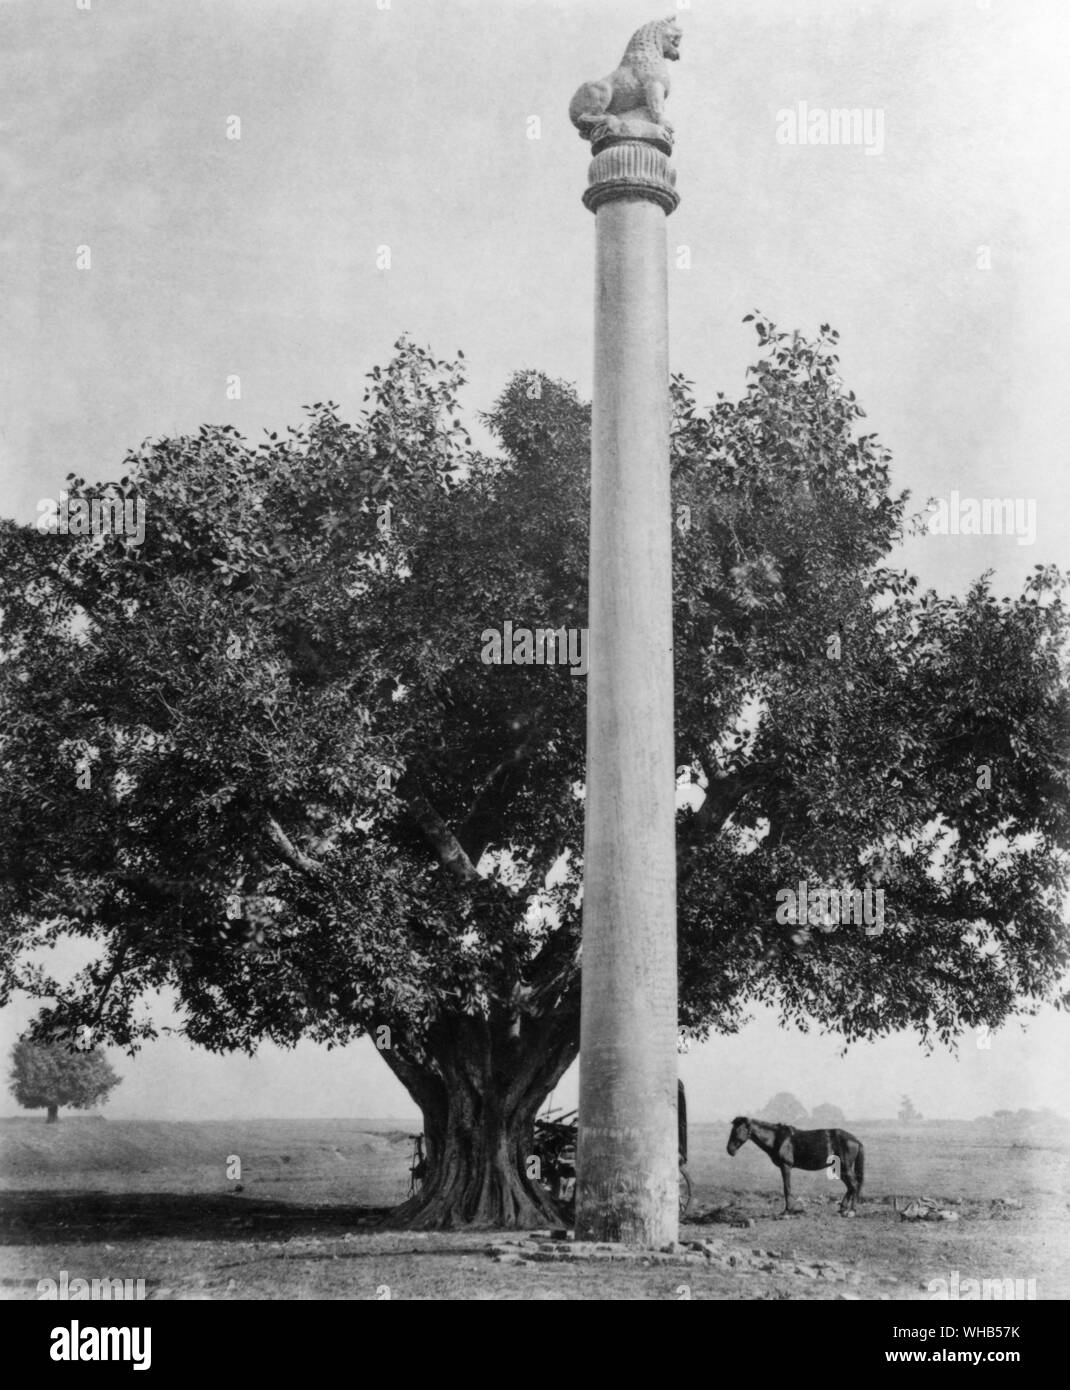 Ashoka Stambha, a monolithic free-standing column inscribed with edicts constructed by the Emperor Ashoka. Believed to cosmic. The stambha functions as a bond, which joins the heaven (Svarga) and the earth (prithvi). In the Atharva Veda, a celestial stambha is described as a scaffold, which supports the cosmos and material creation.. . Stock Photo